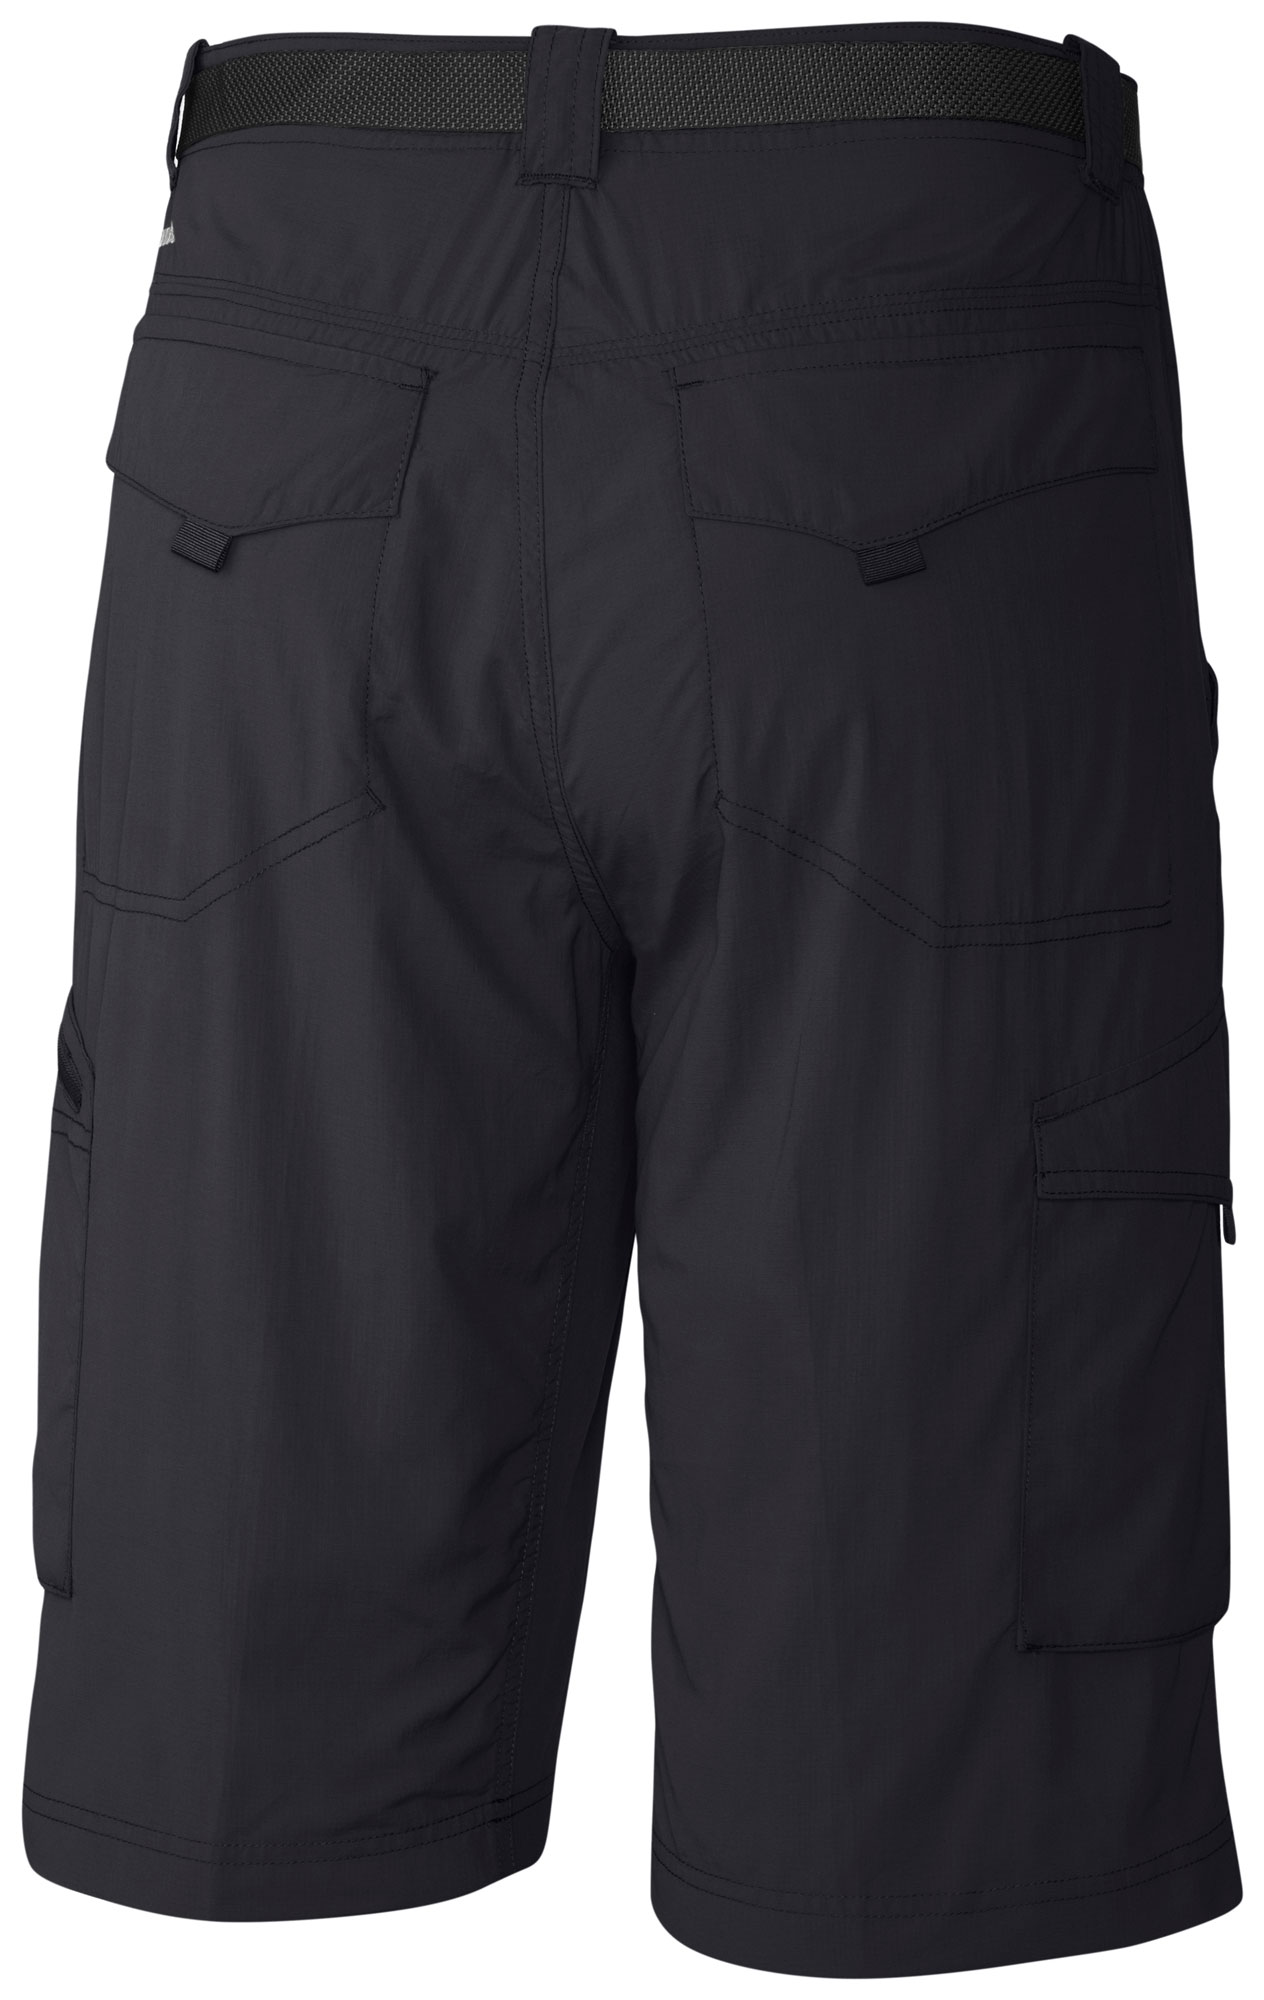 Men’s shorts with side pockets